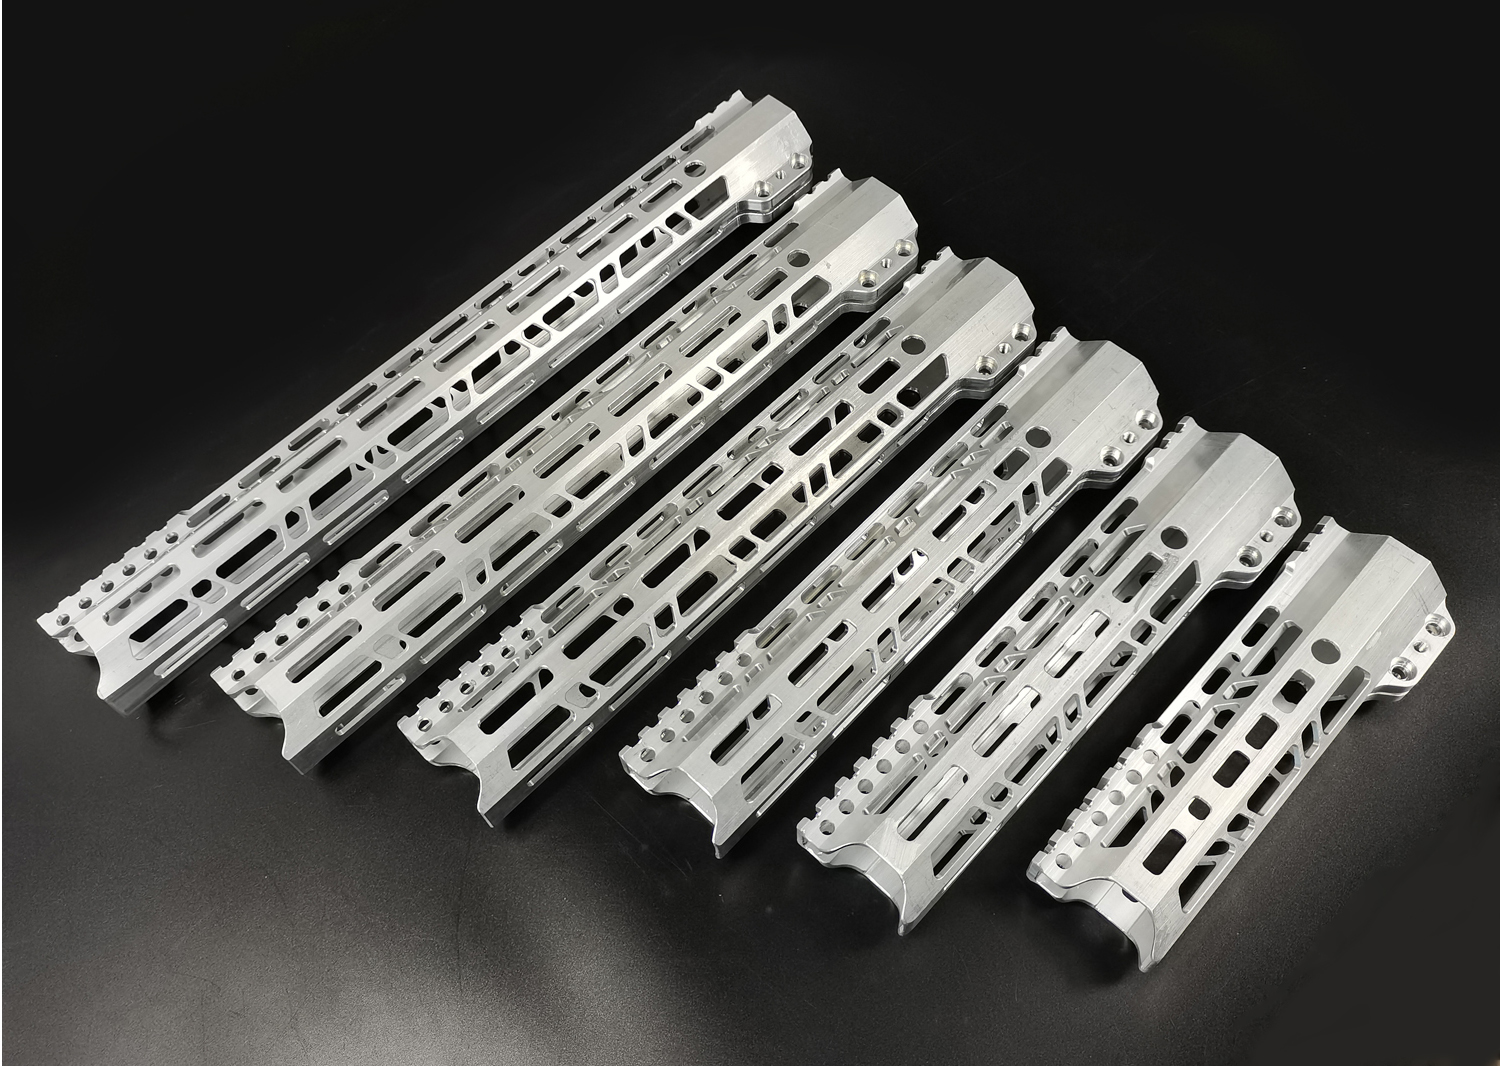 7/9/10/12//13.5/15 Inch Clamp Mount Type M-LOK Handguards Edge CNC Chamfering For AR15 Accessories (.223/5.56) Raw aluminum Color MLH-xA